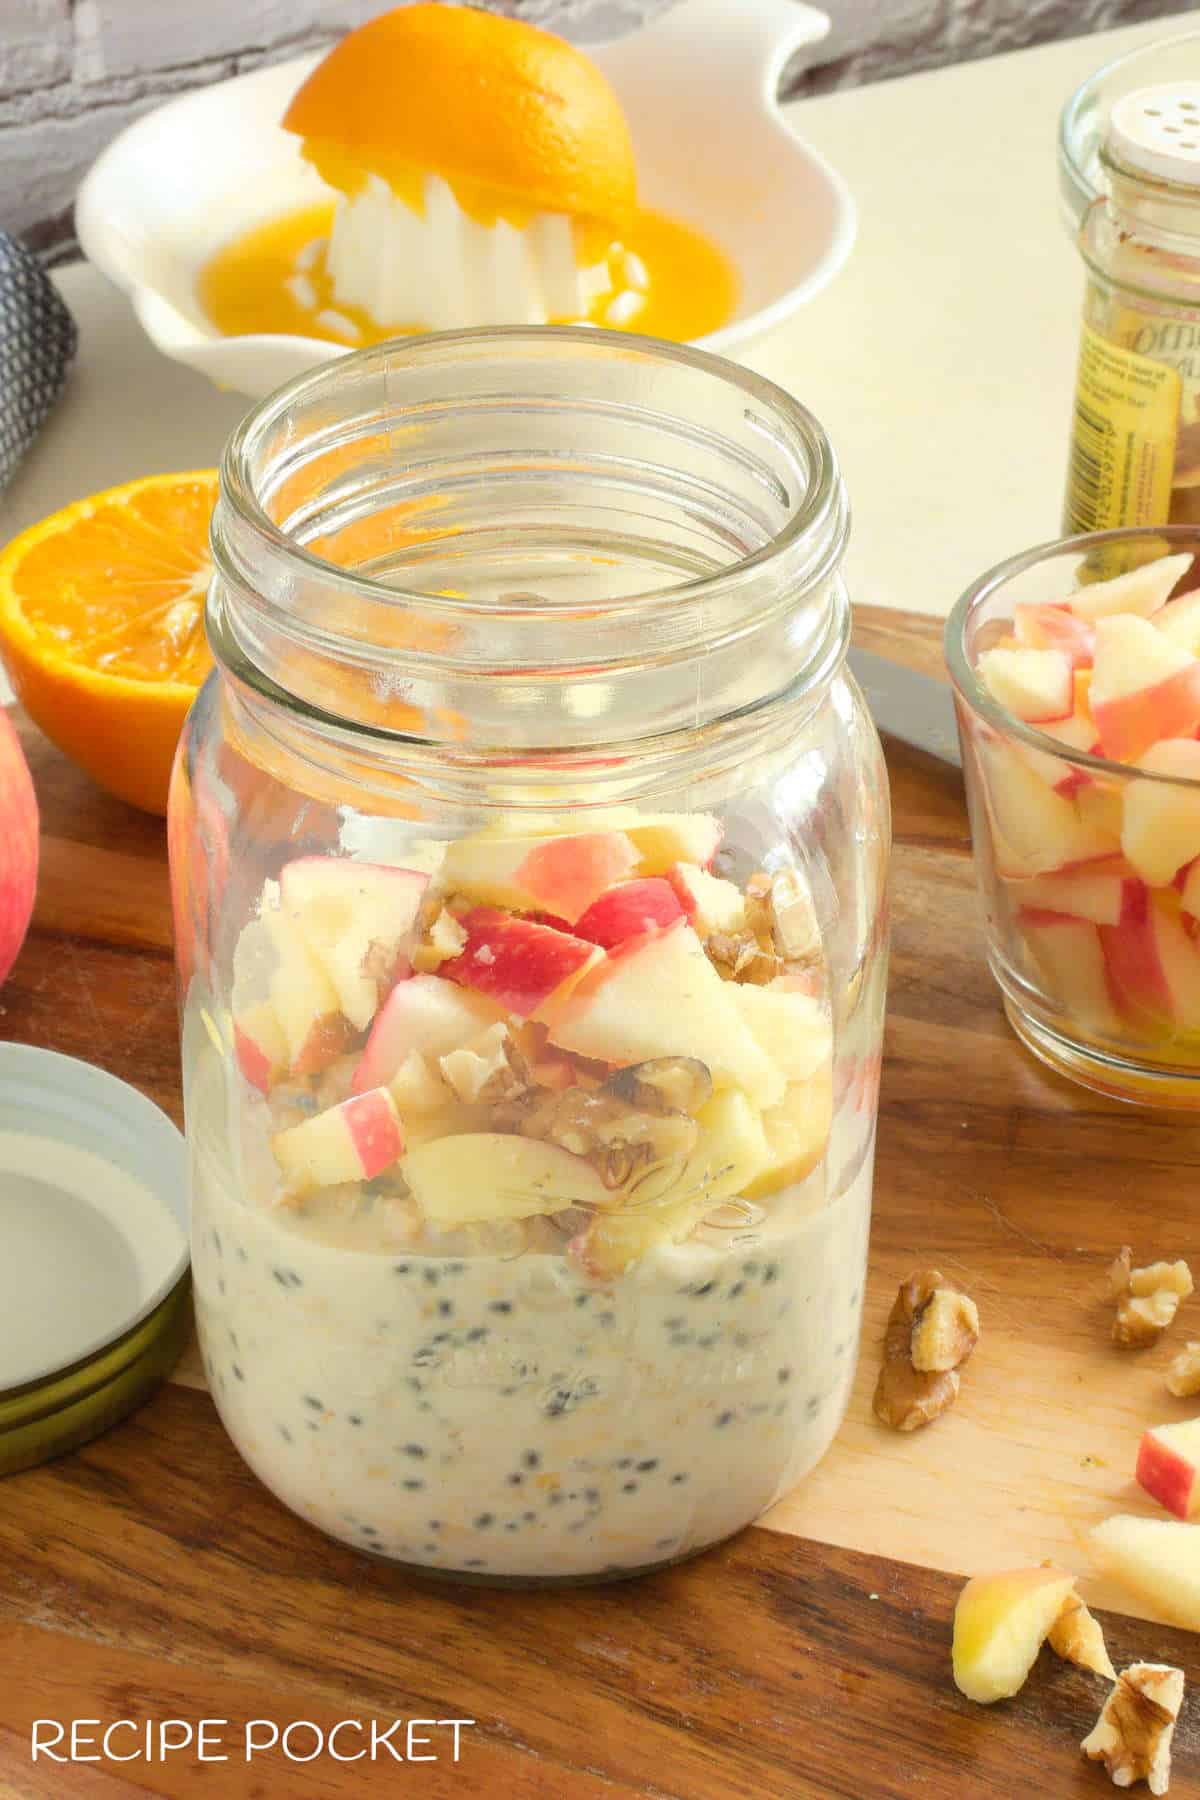 Overnight oats with topping in a screw top jar.